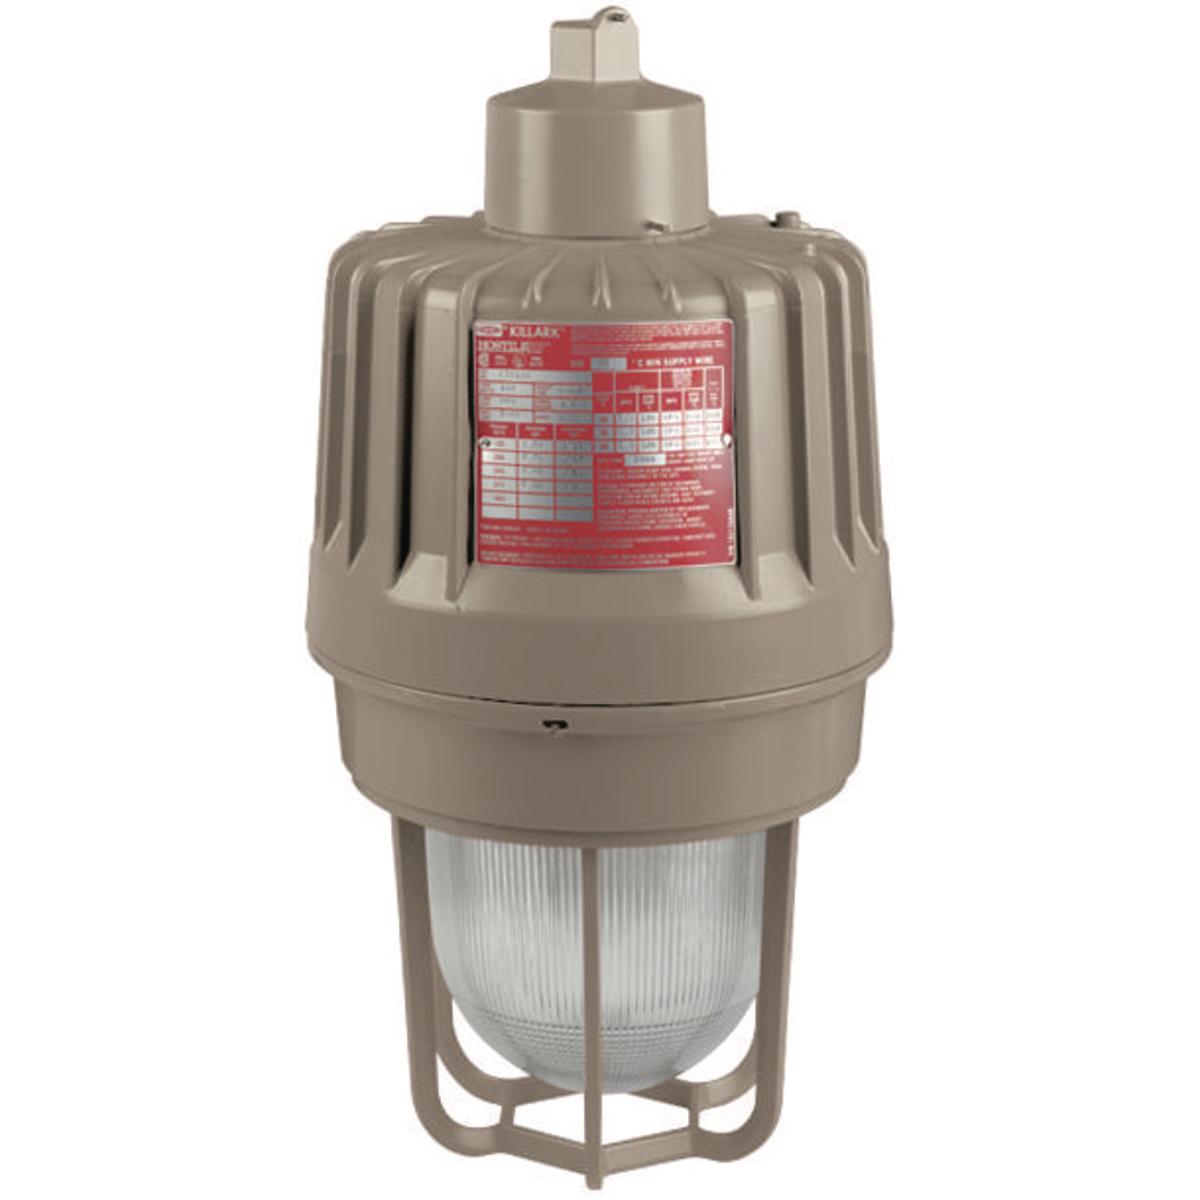 Hubbell EZL10030A3G EZL 120-277V 1" NPT Pendant Mount Fluted Globe with Guard  ; The EZL Series LED High Bay/ Low Bay fixtures are high quality explosion proof light fixtures. Designed to go into the harshest environments where explosive vapors are present .